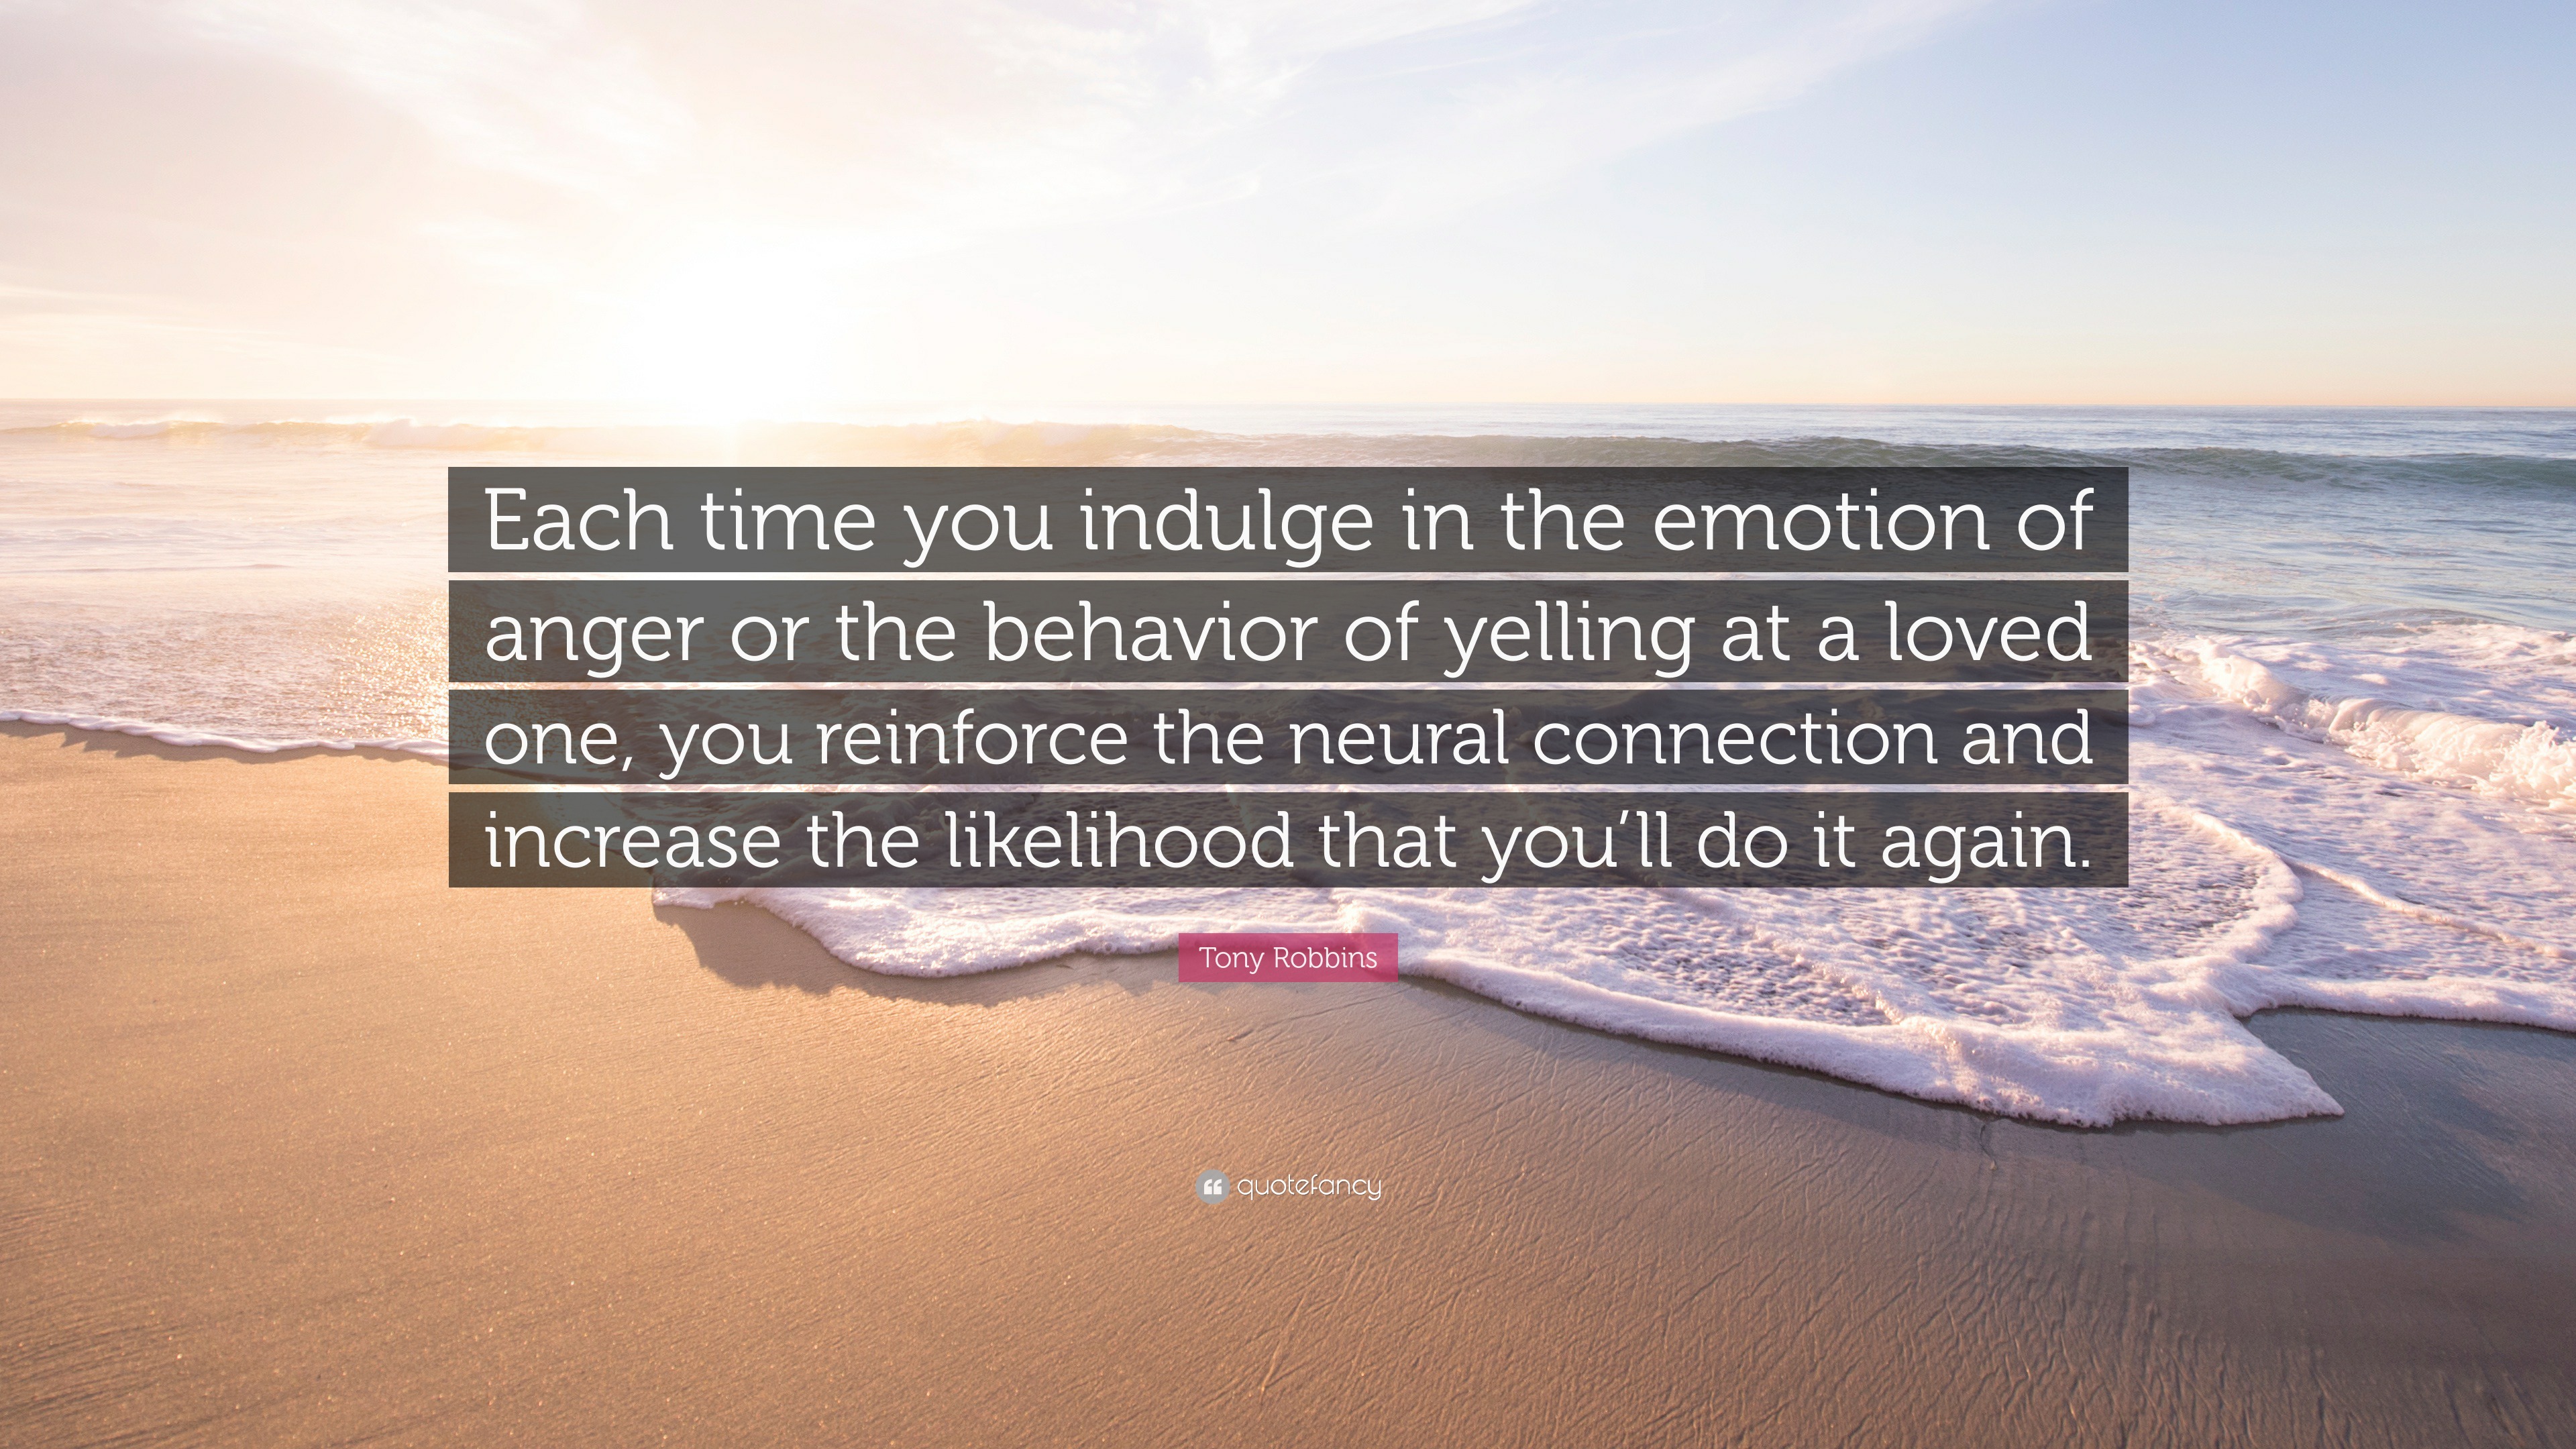 Tony Robbins Quote “Each time you indulge in the emotion of anger or the